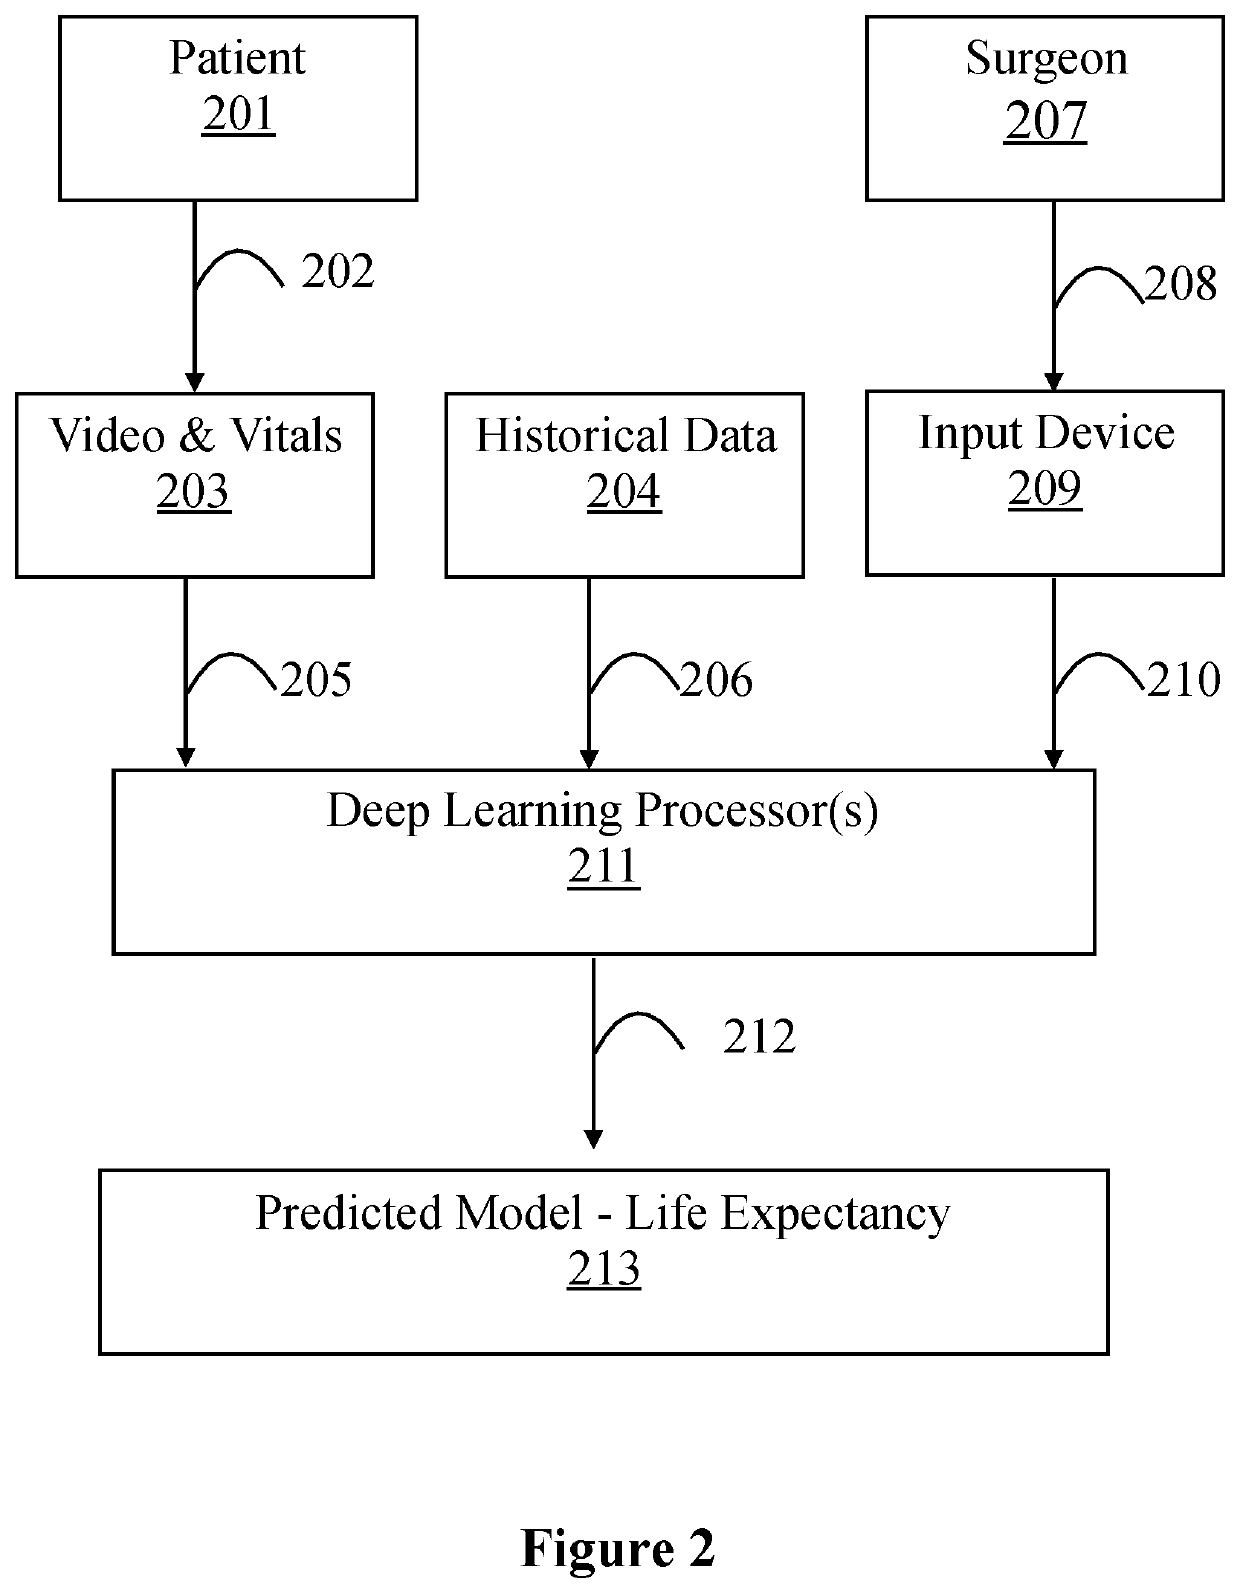 System for Surgical Decisions Using Deep Learning